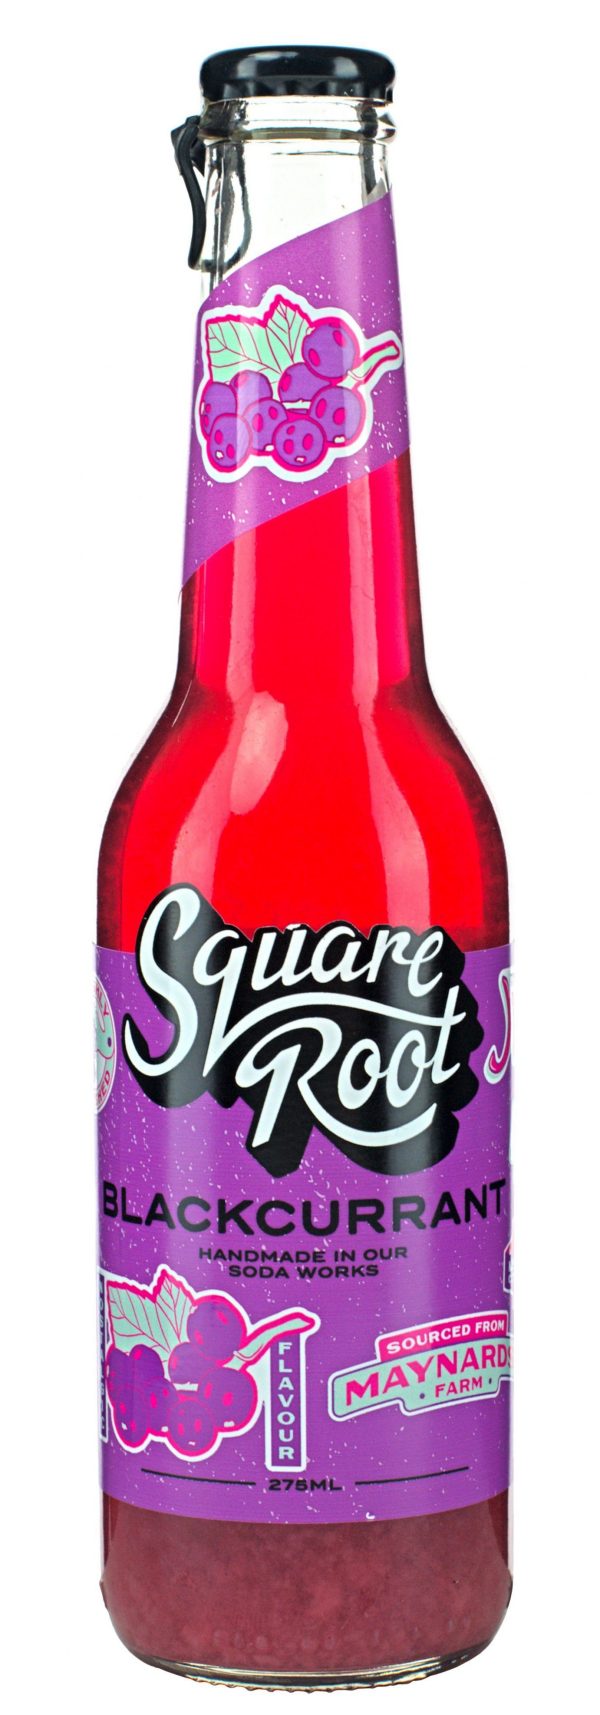 ALL THINGS DRINKS - Square Root - Blackcurrent Soda